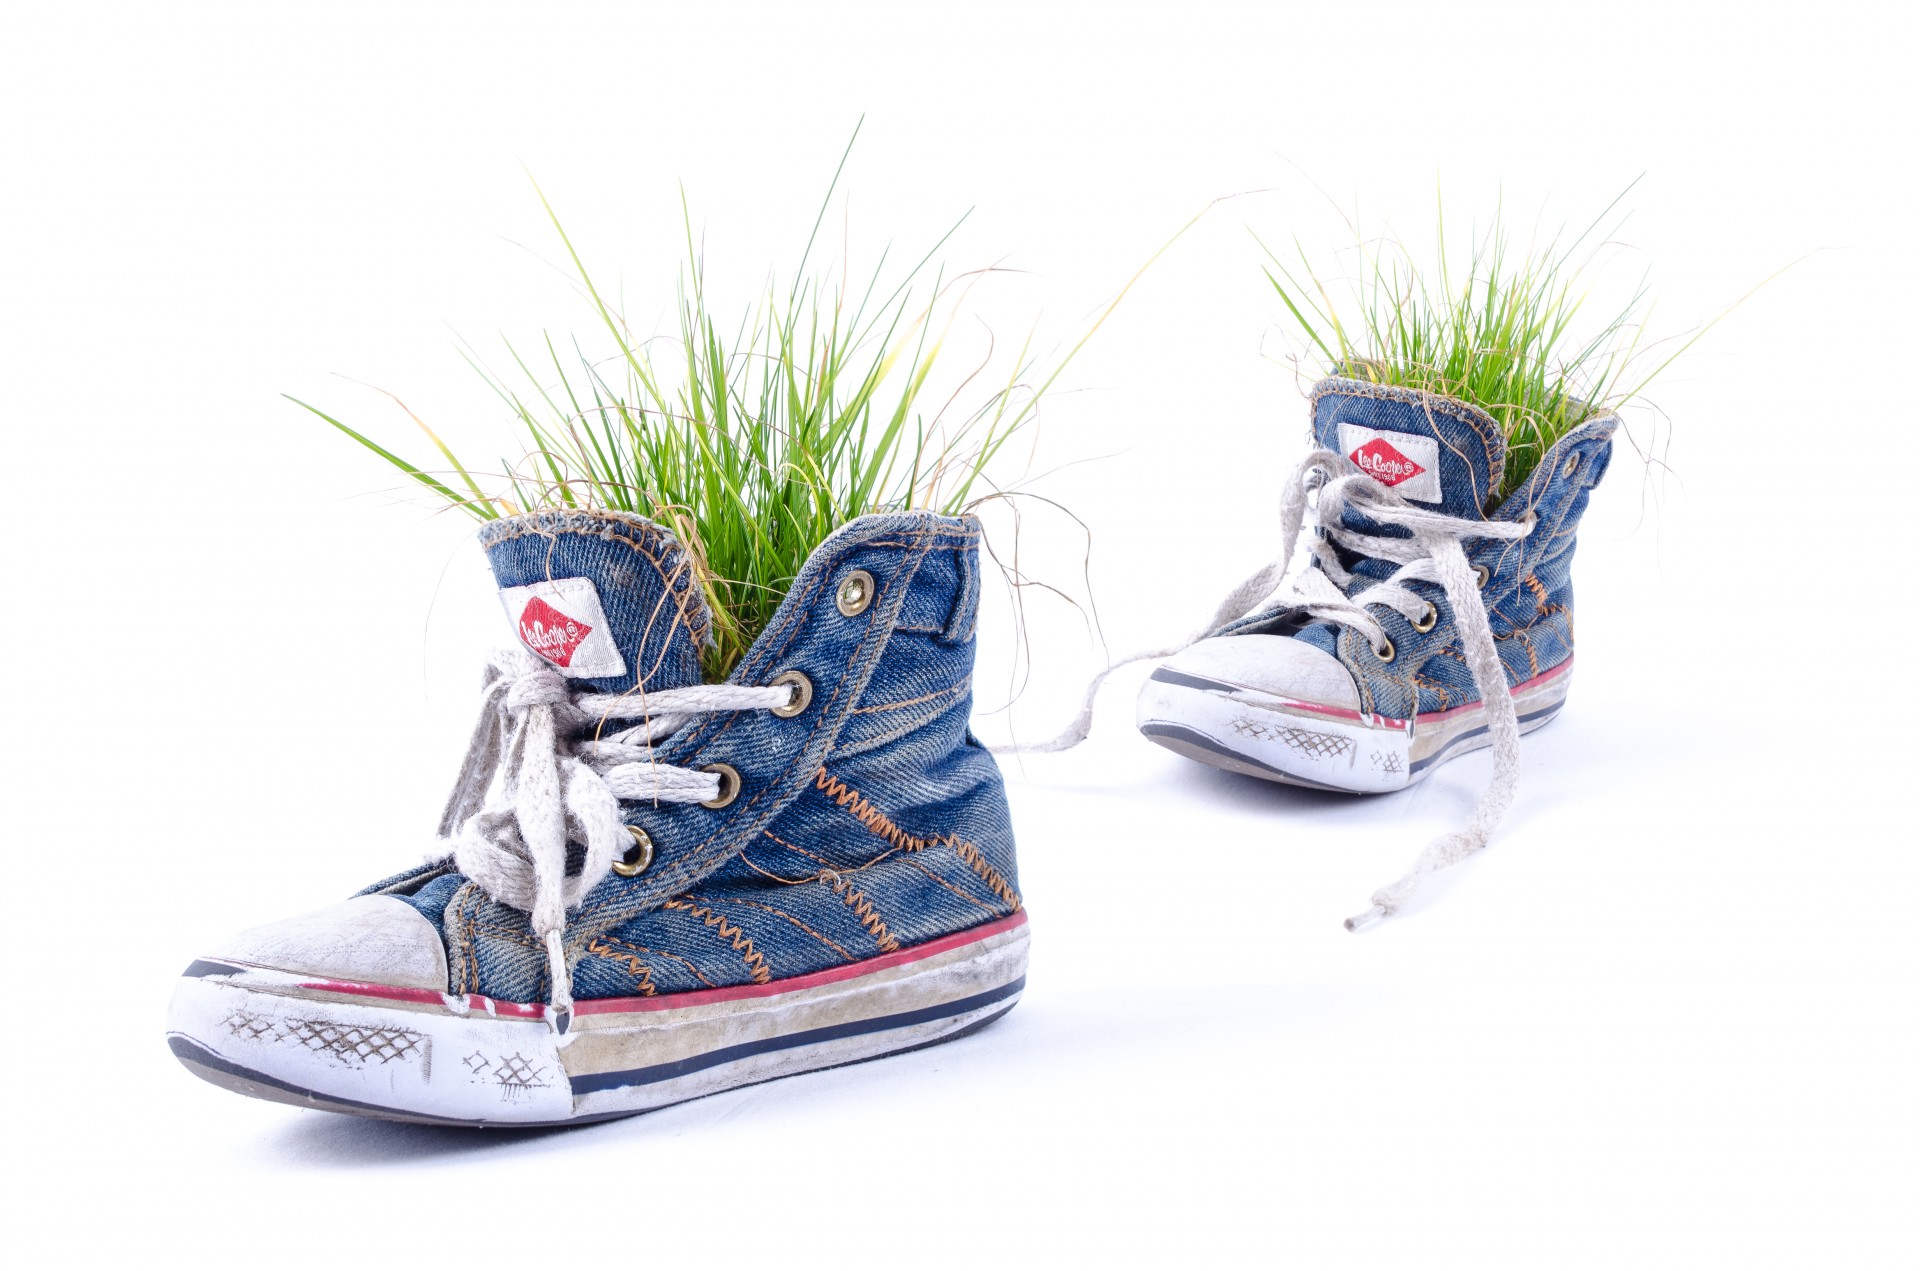 Grass In The Old Shoes